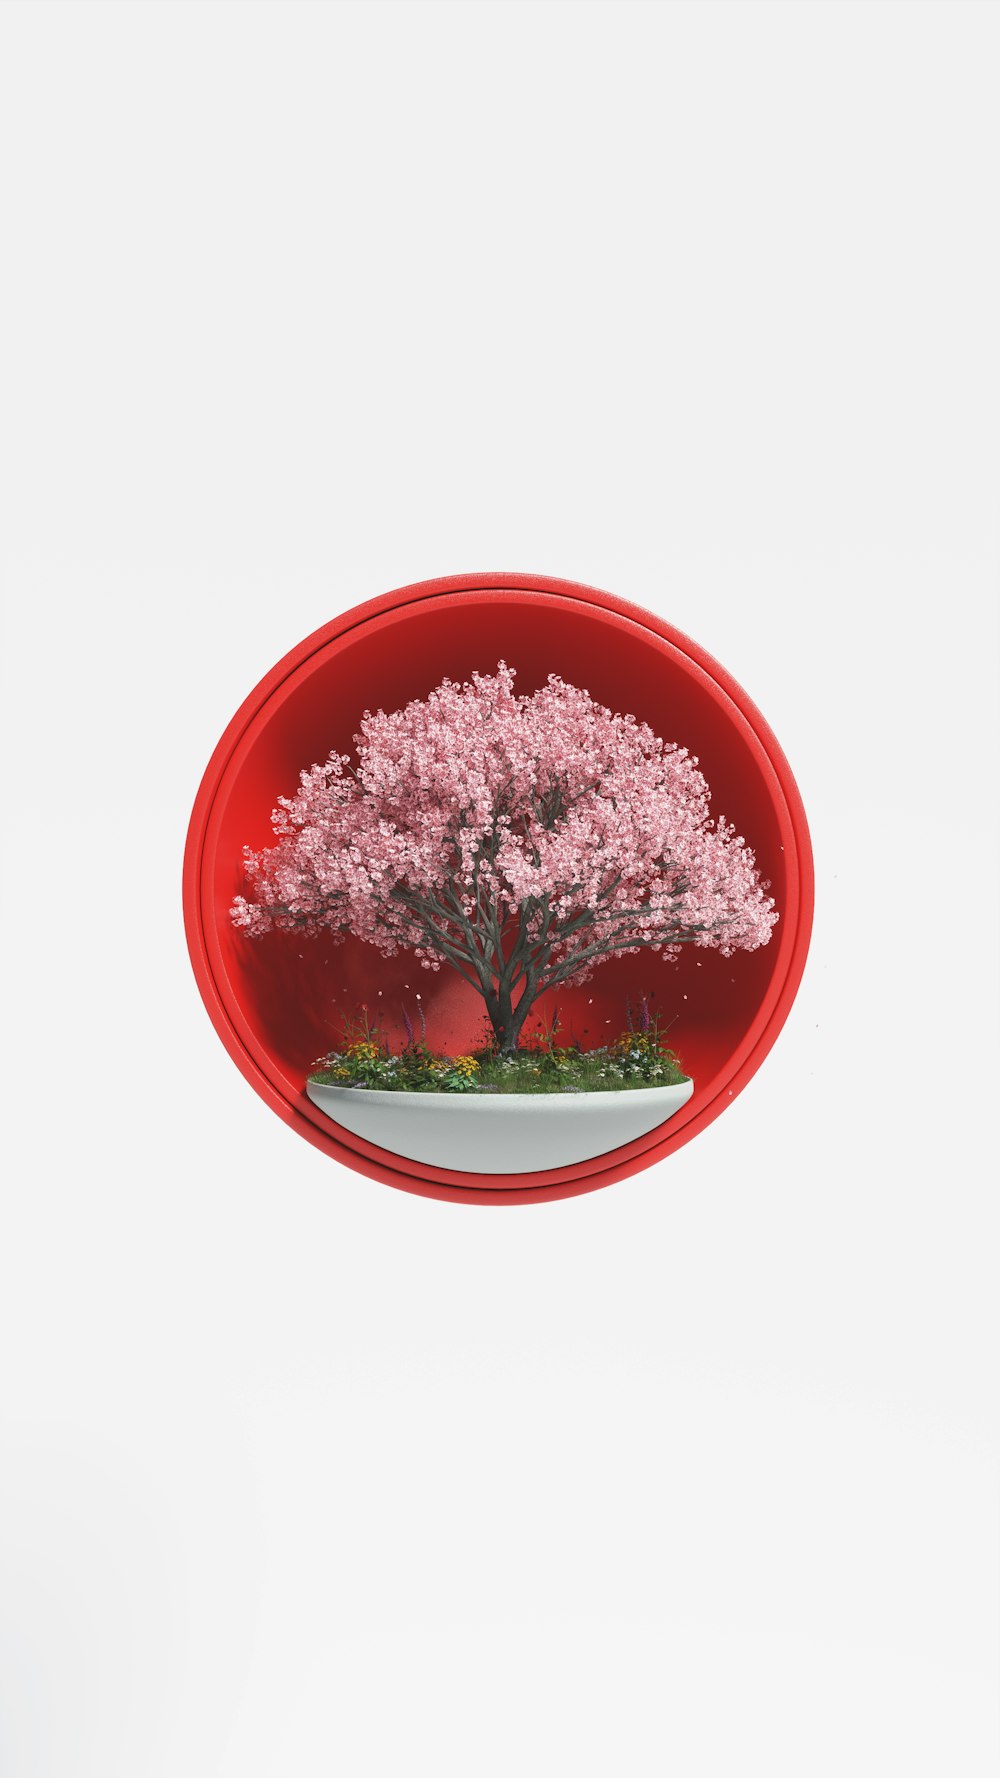 a bonsai tree in a red bowl on a white background